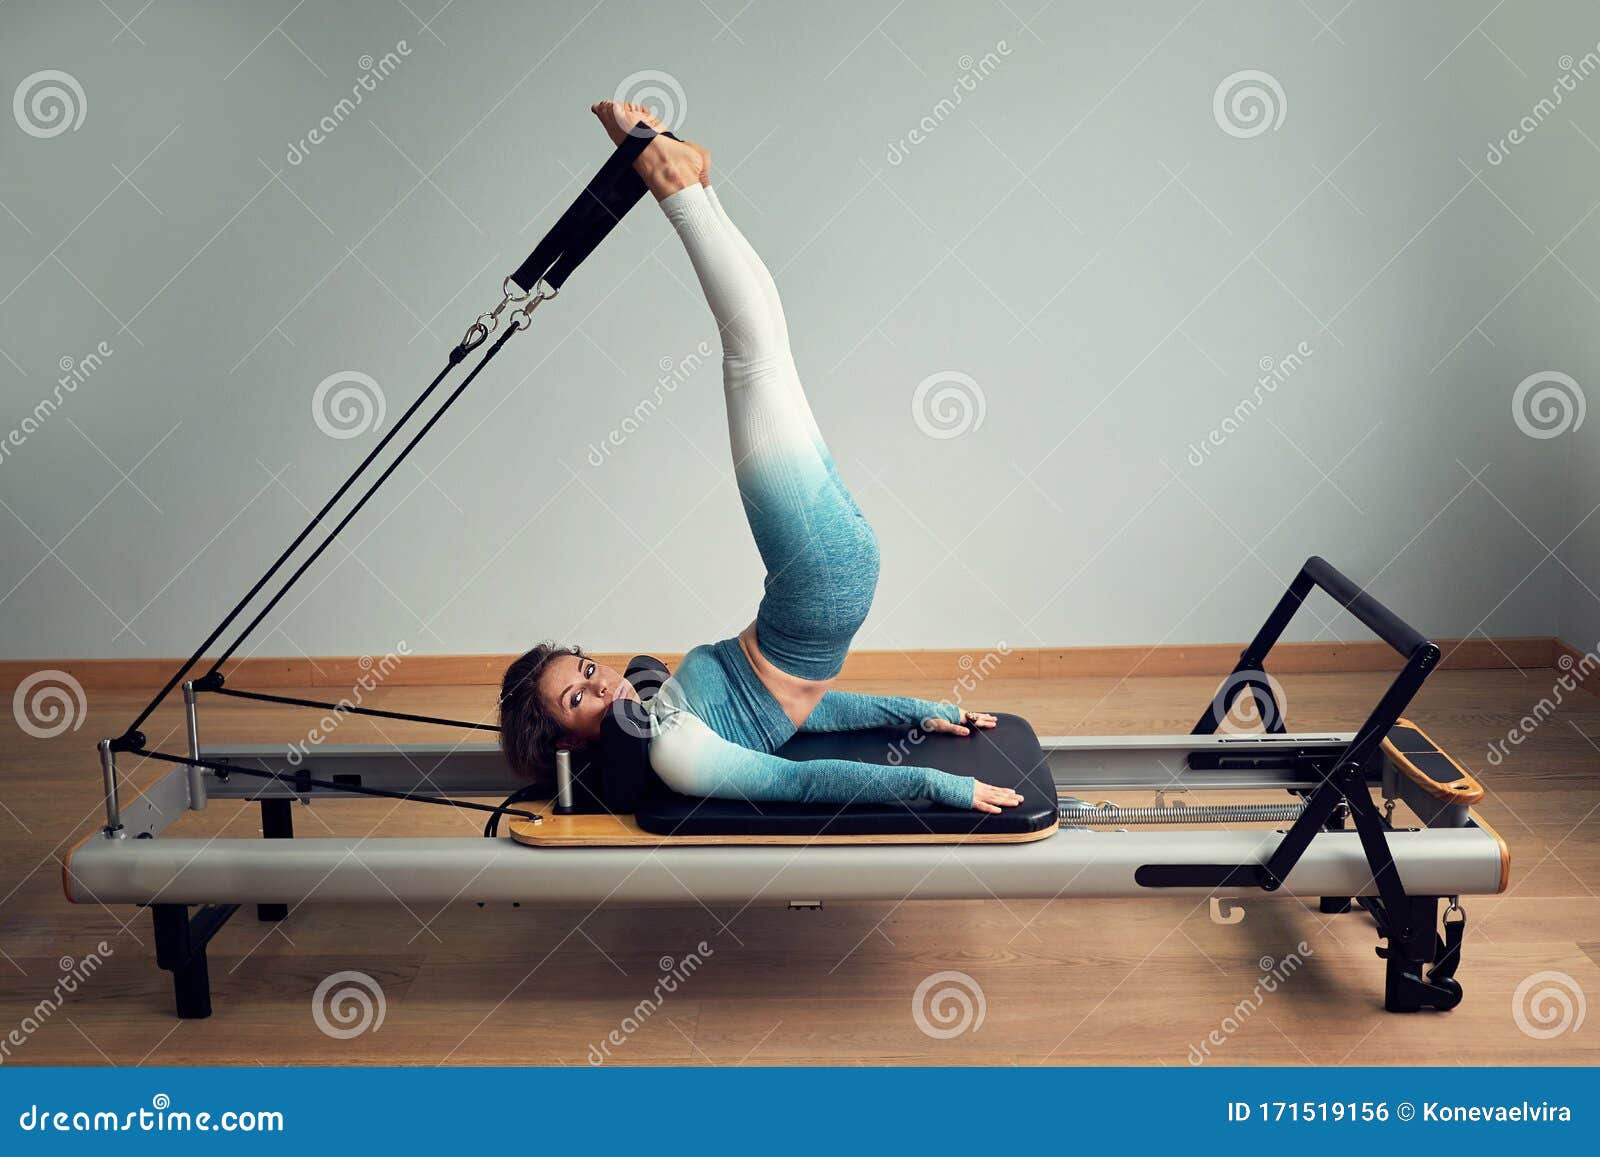 Young Asian Woman Pilates Stretching Sport in Reformer Bed